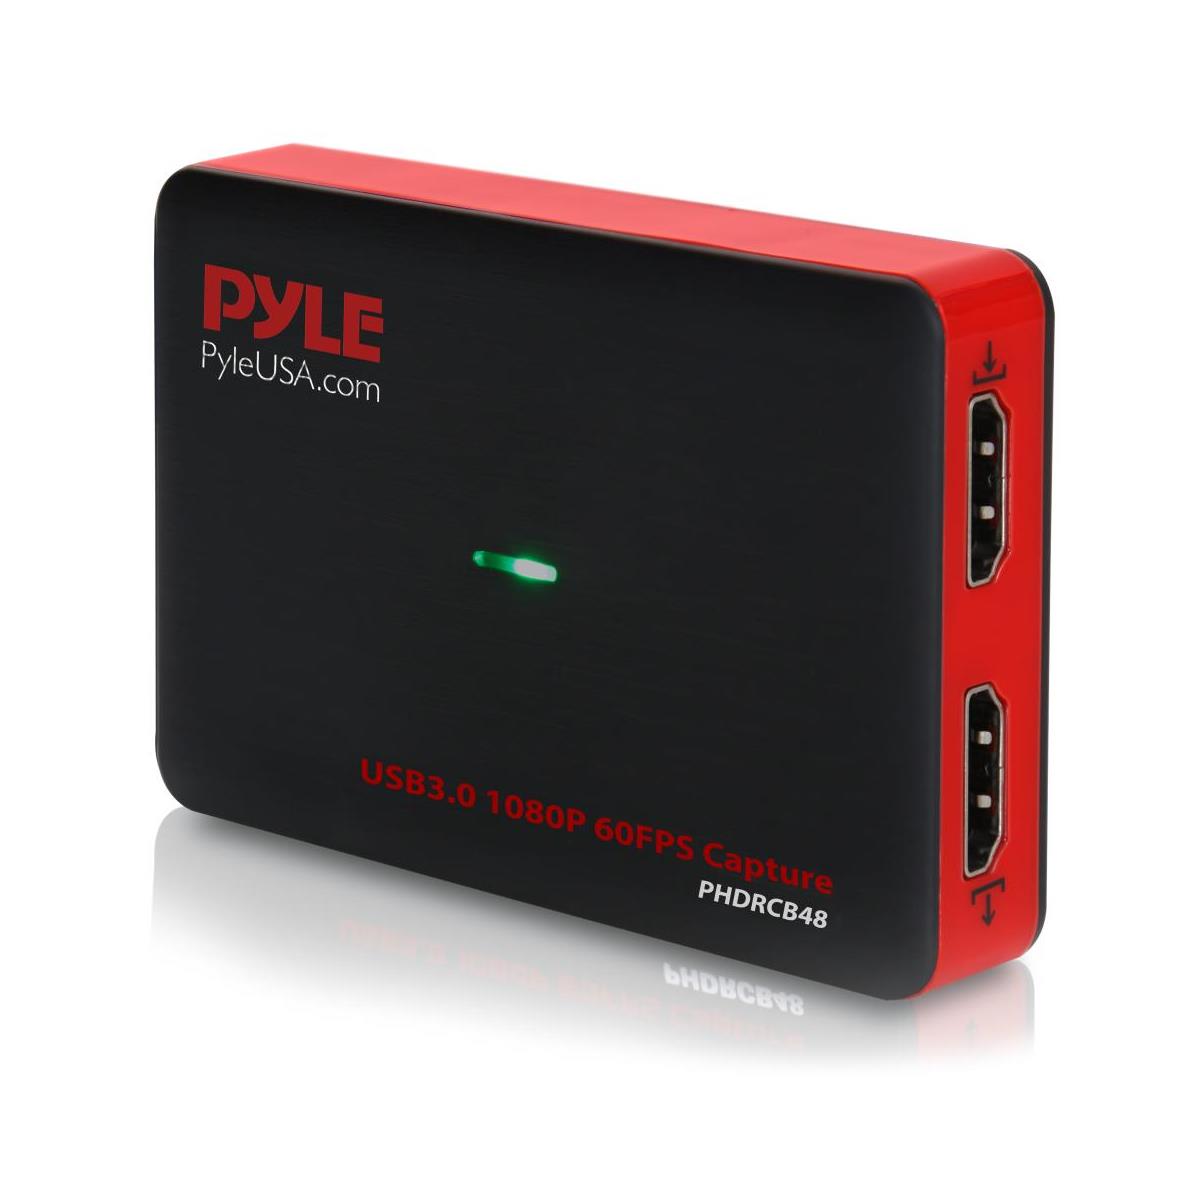 Image of Pyle PHDRCB48.5 Live Streaming USB3.0 HDMI Video Recorder with HDMI Pass through